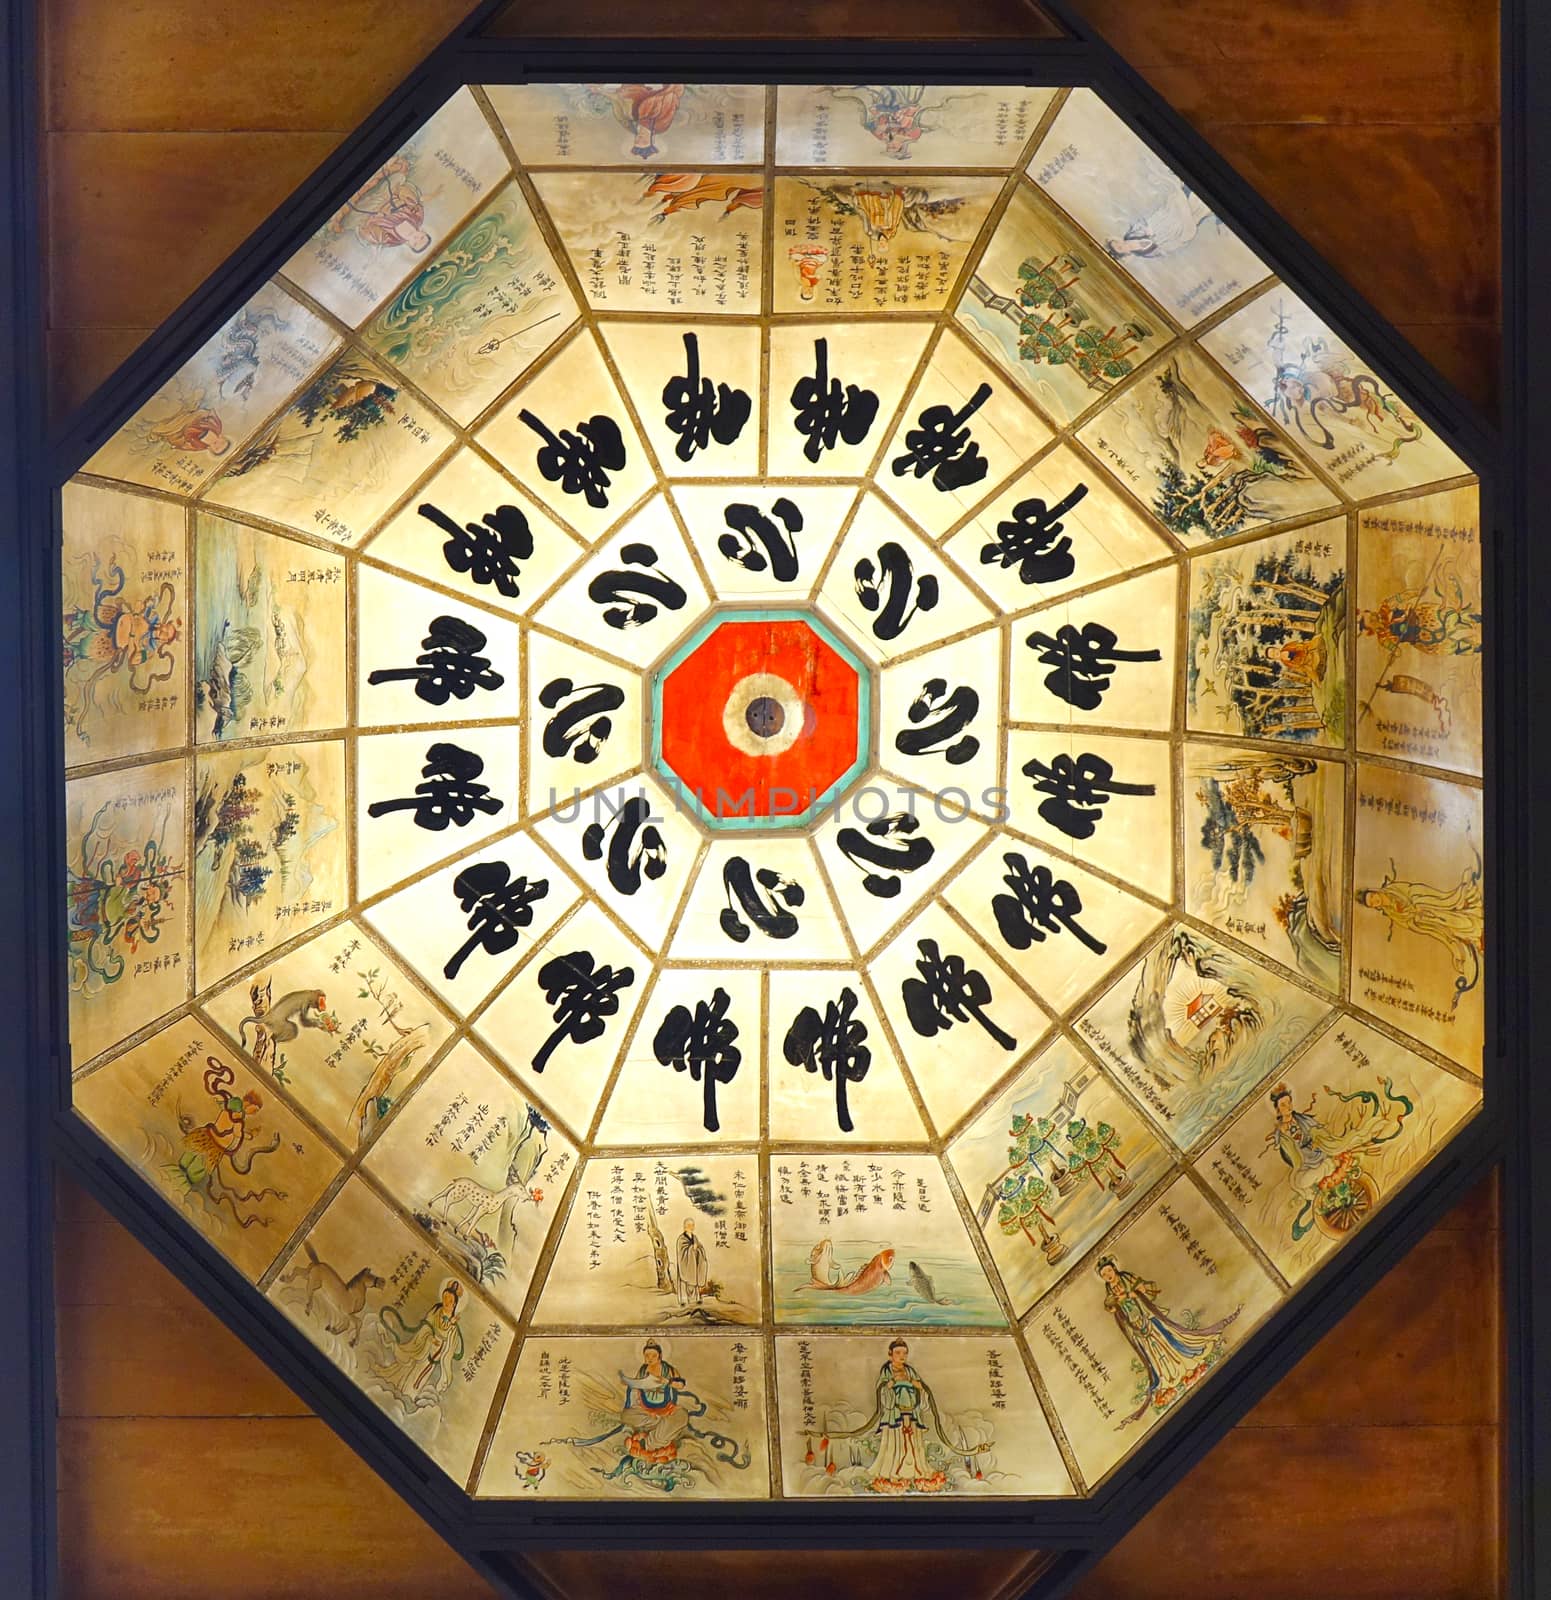 KAOHSIUNG, TAIWAN -- JANUARY 25, 2020: An octagon ceiling light with illustrations of Buddhist scriptures at the Fo Guang Shan Buddhist complex. The Chinese says "Heart of Buddha"
